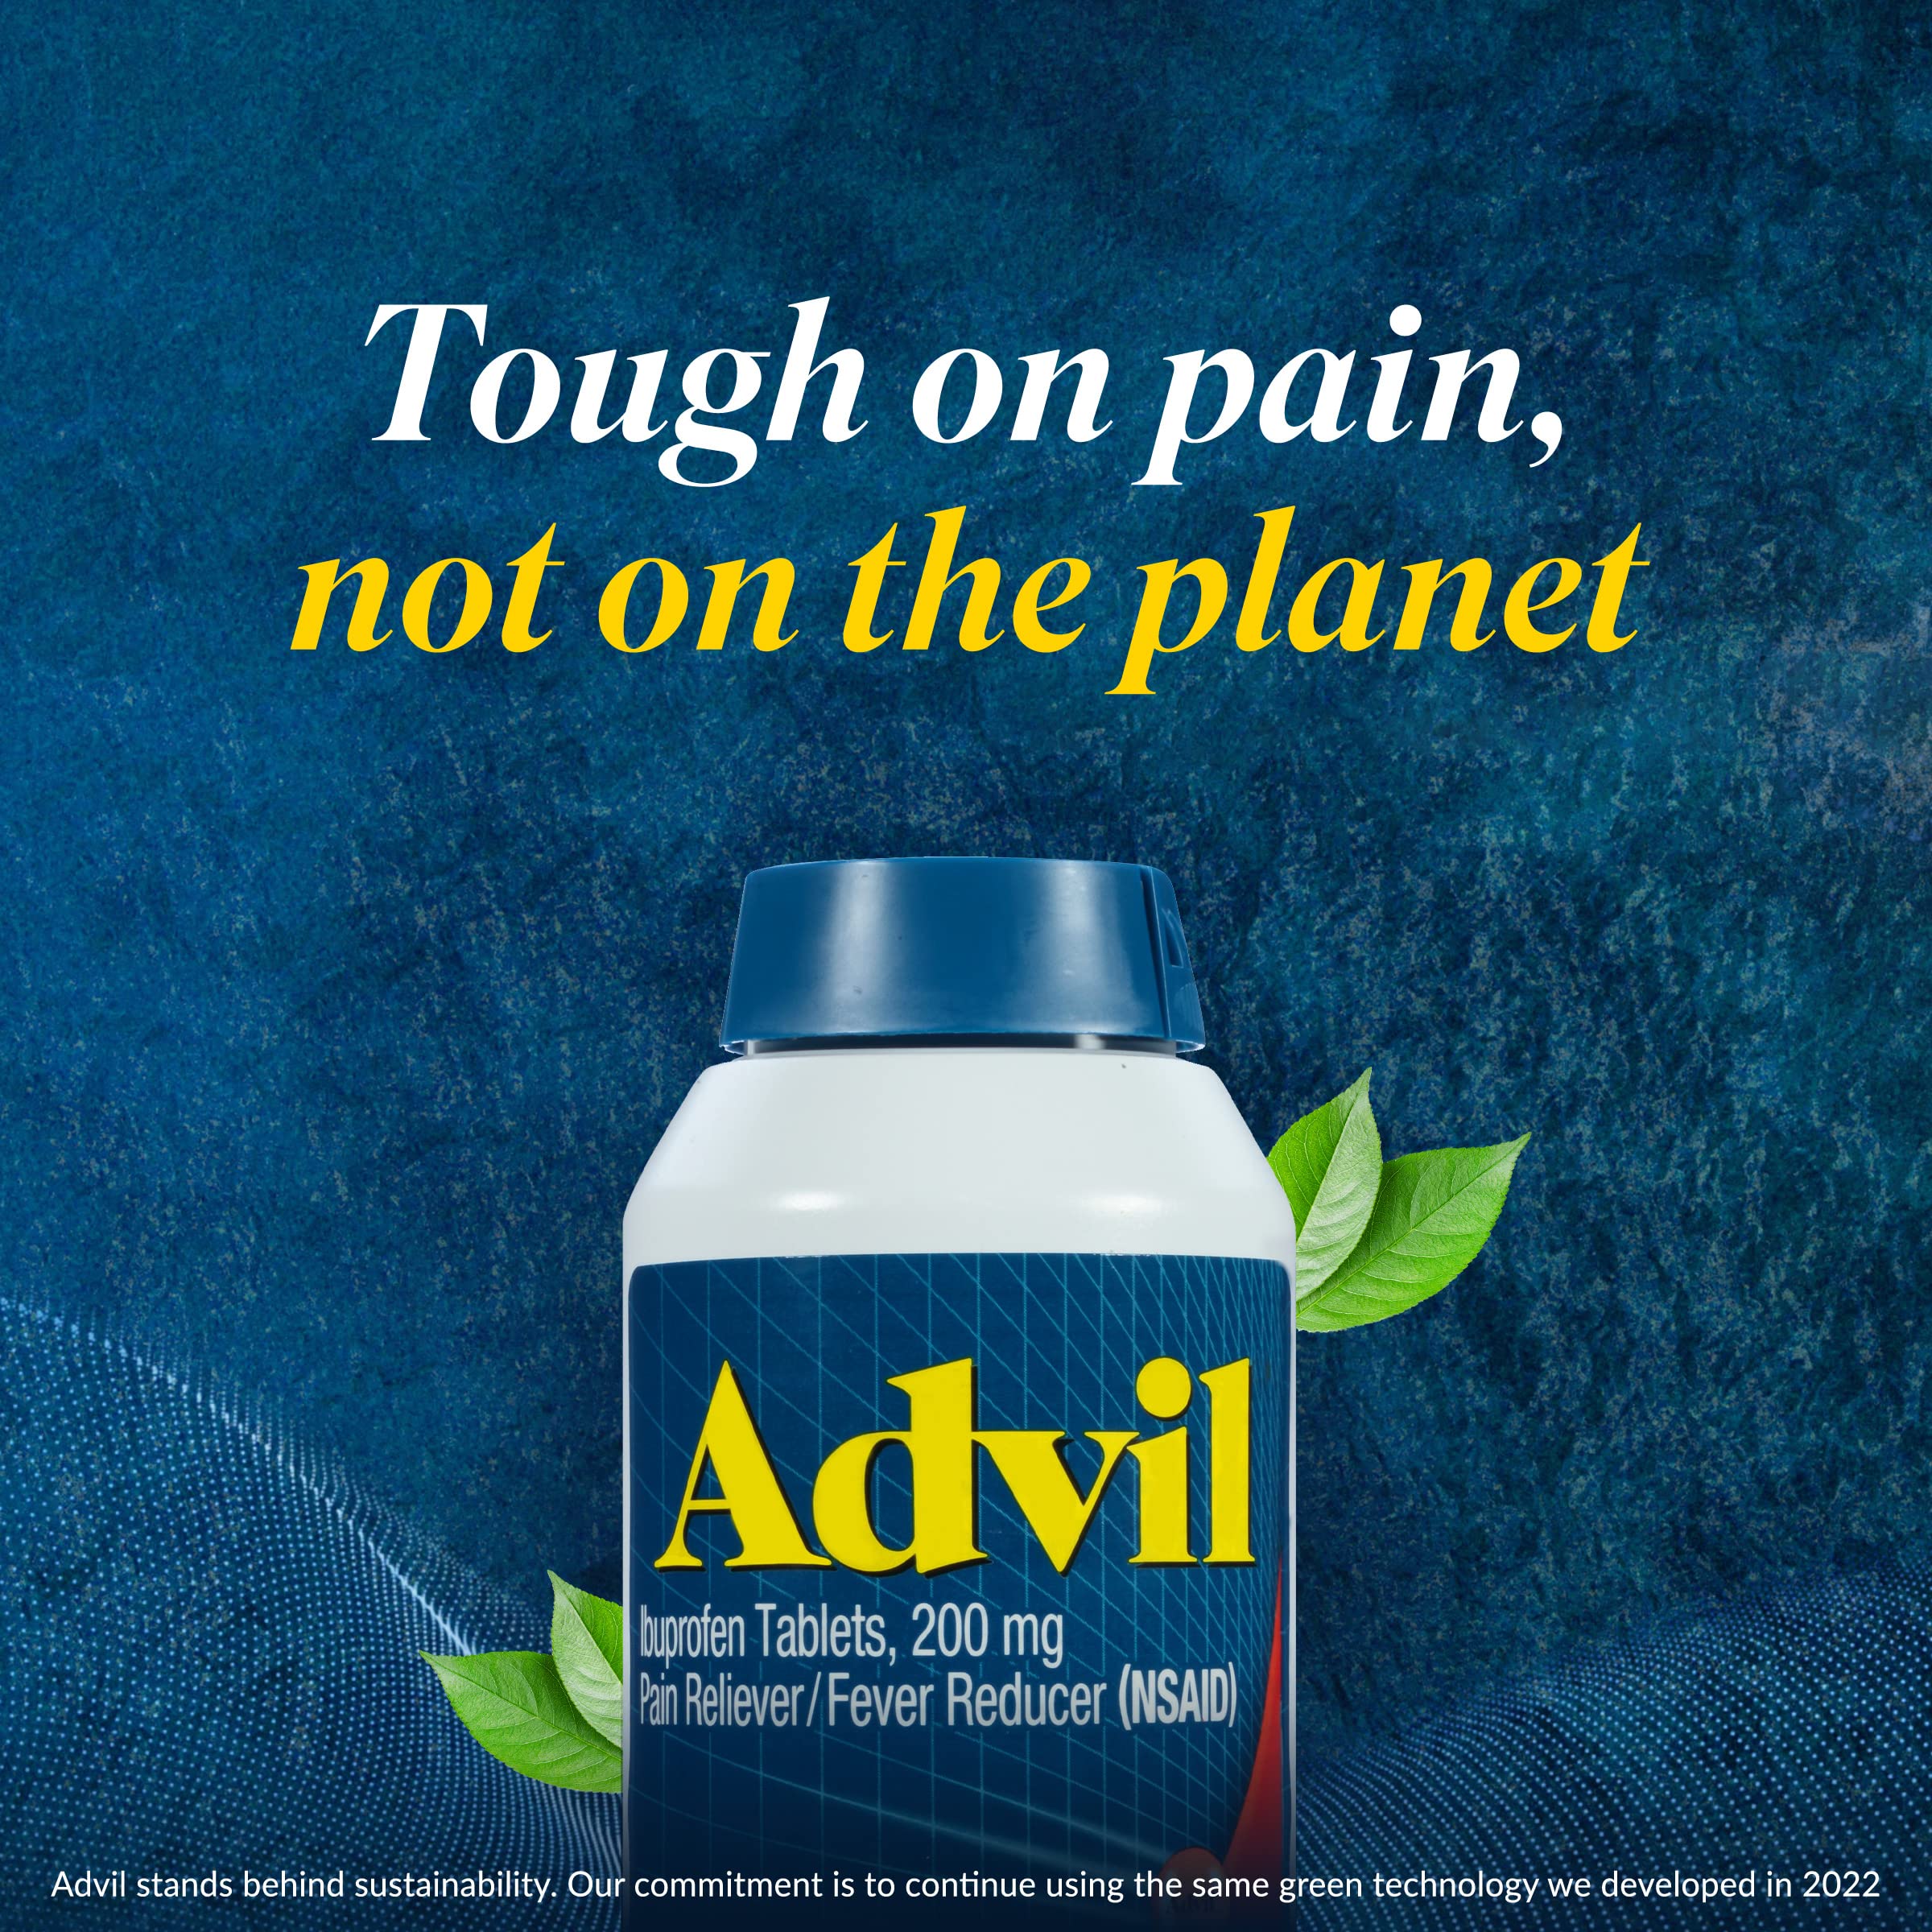 Advil Pain Reliever and Fever Reducer, Pain Relief Medicine with Ibuprofen 200mg for Headache, Backache, Menstrual Pain and Joint Pain Relief - 50 Coated Tablets